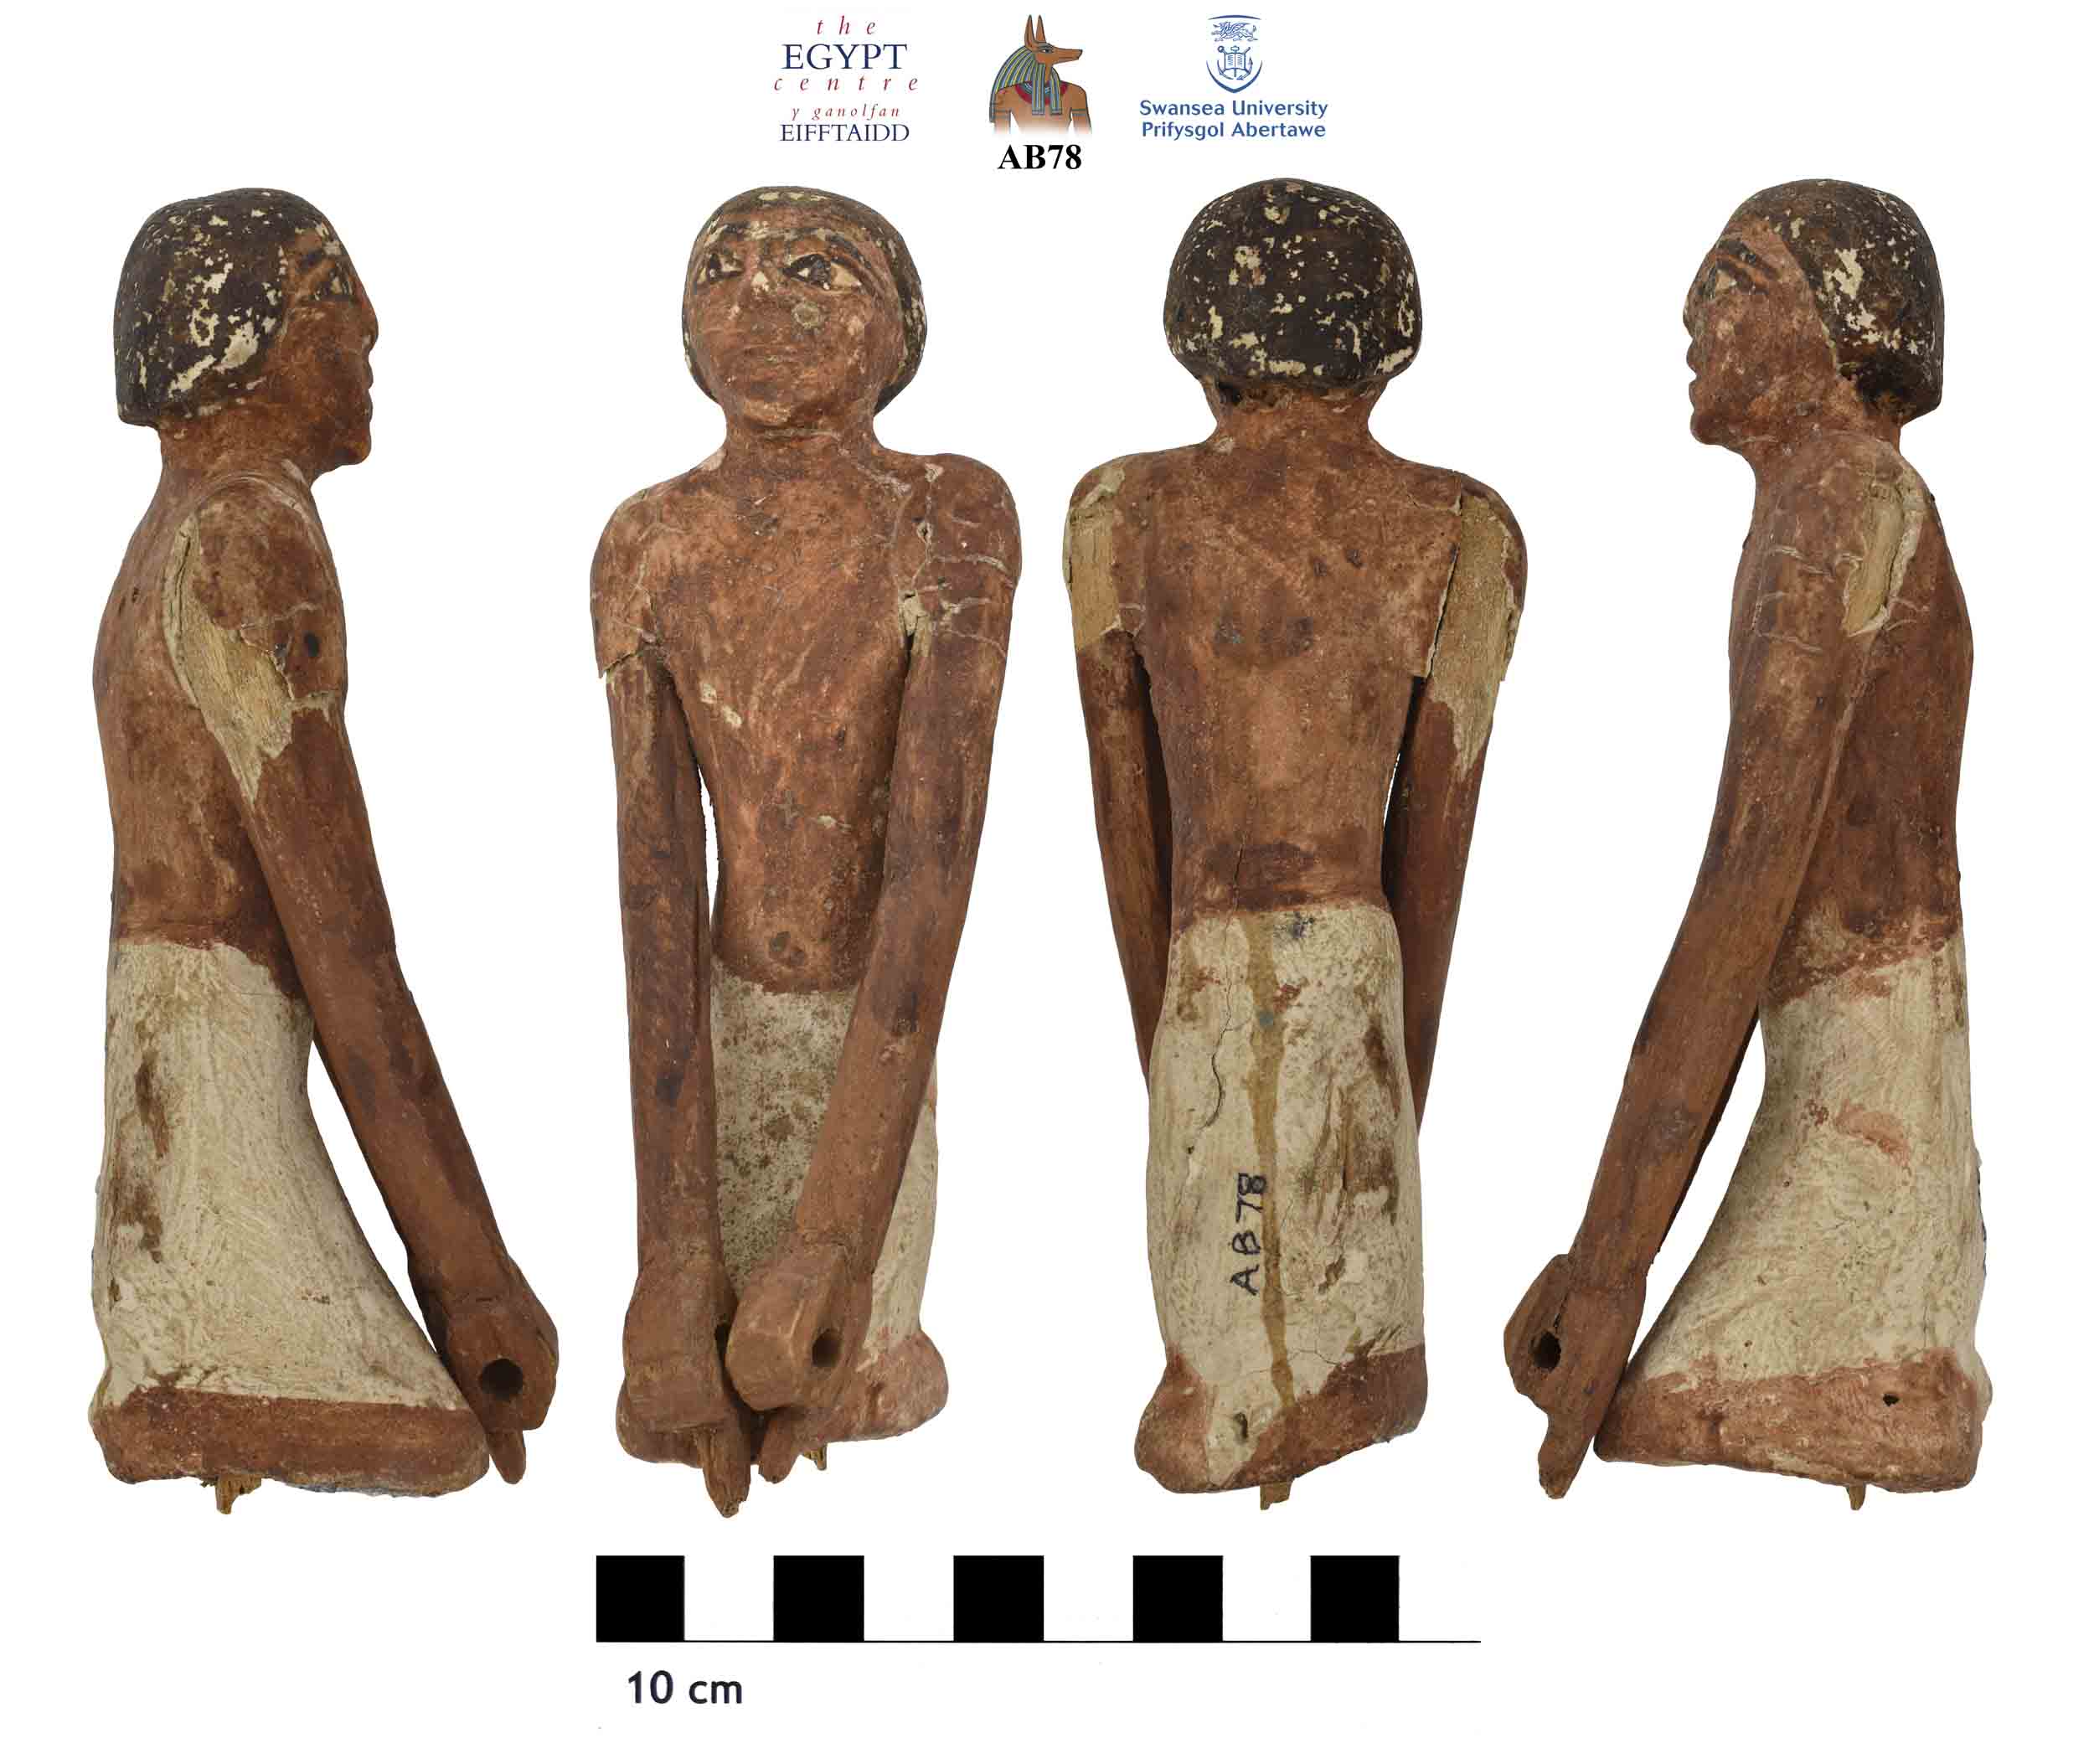 Image for: Wooden figure from a funerary model